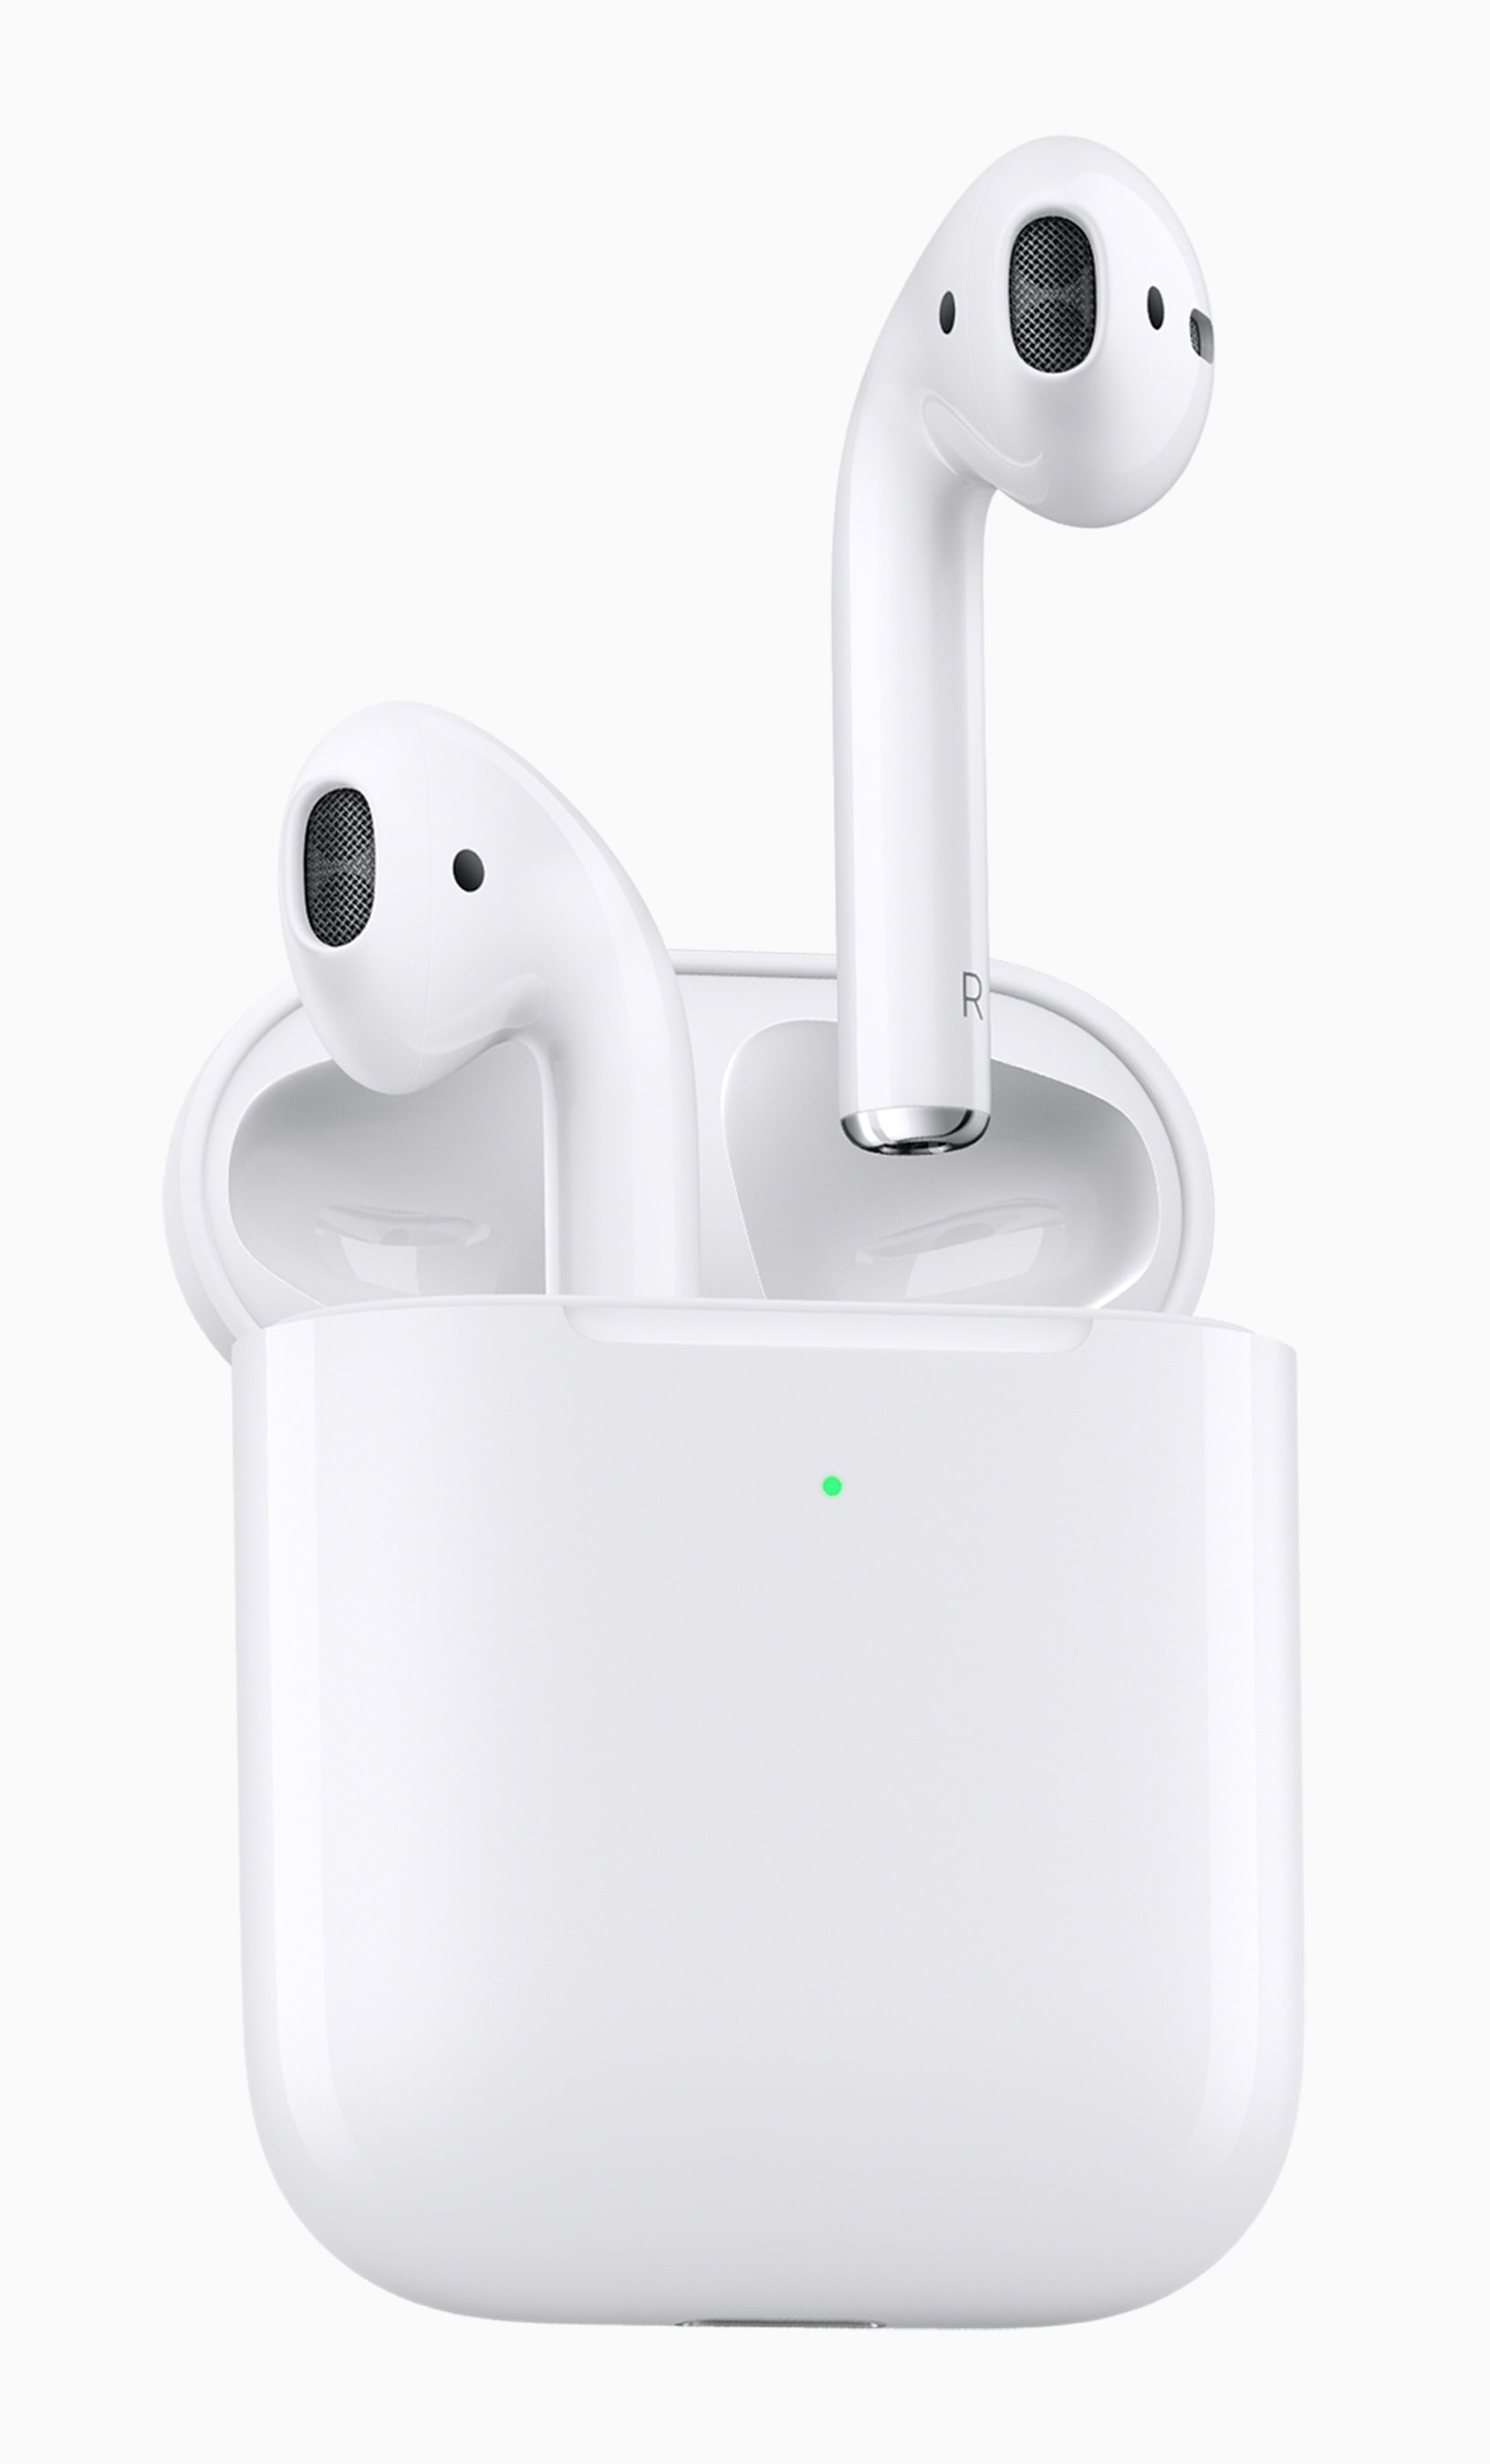 Second-gen AirPods offer the option of Apple's own wireless charging case.